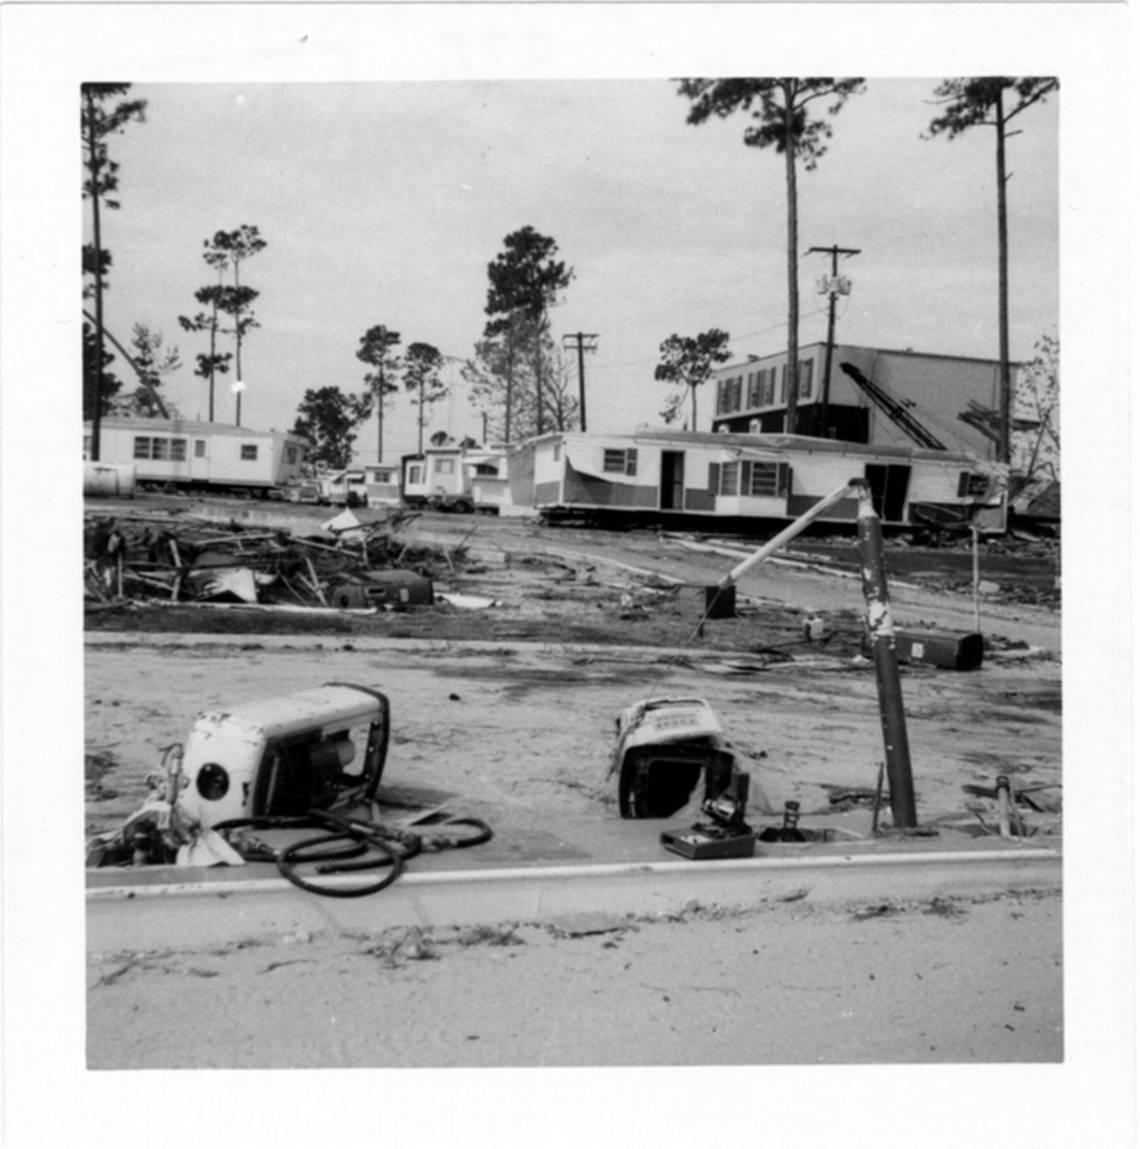 Damage from Hurricane Camille, the second-strongest Category 5 hurricane to come ashore in the U.S., which hit the Mississippi coast on Aug. 17, 1969.